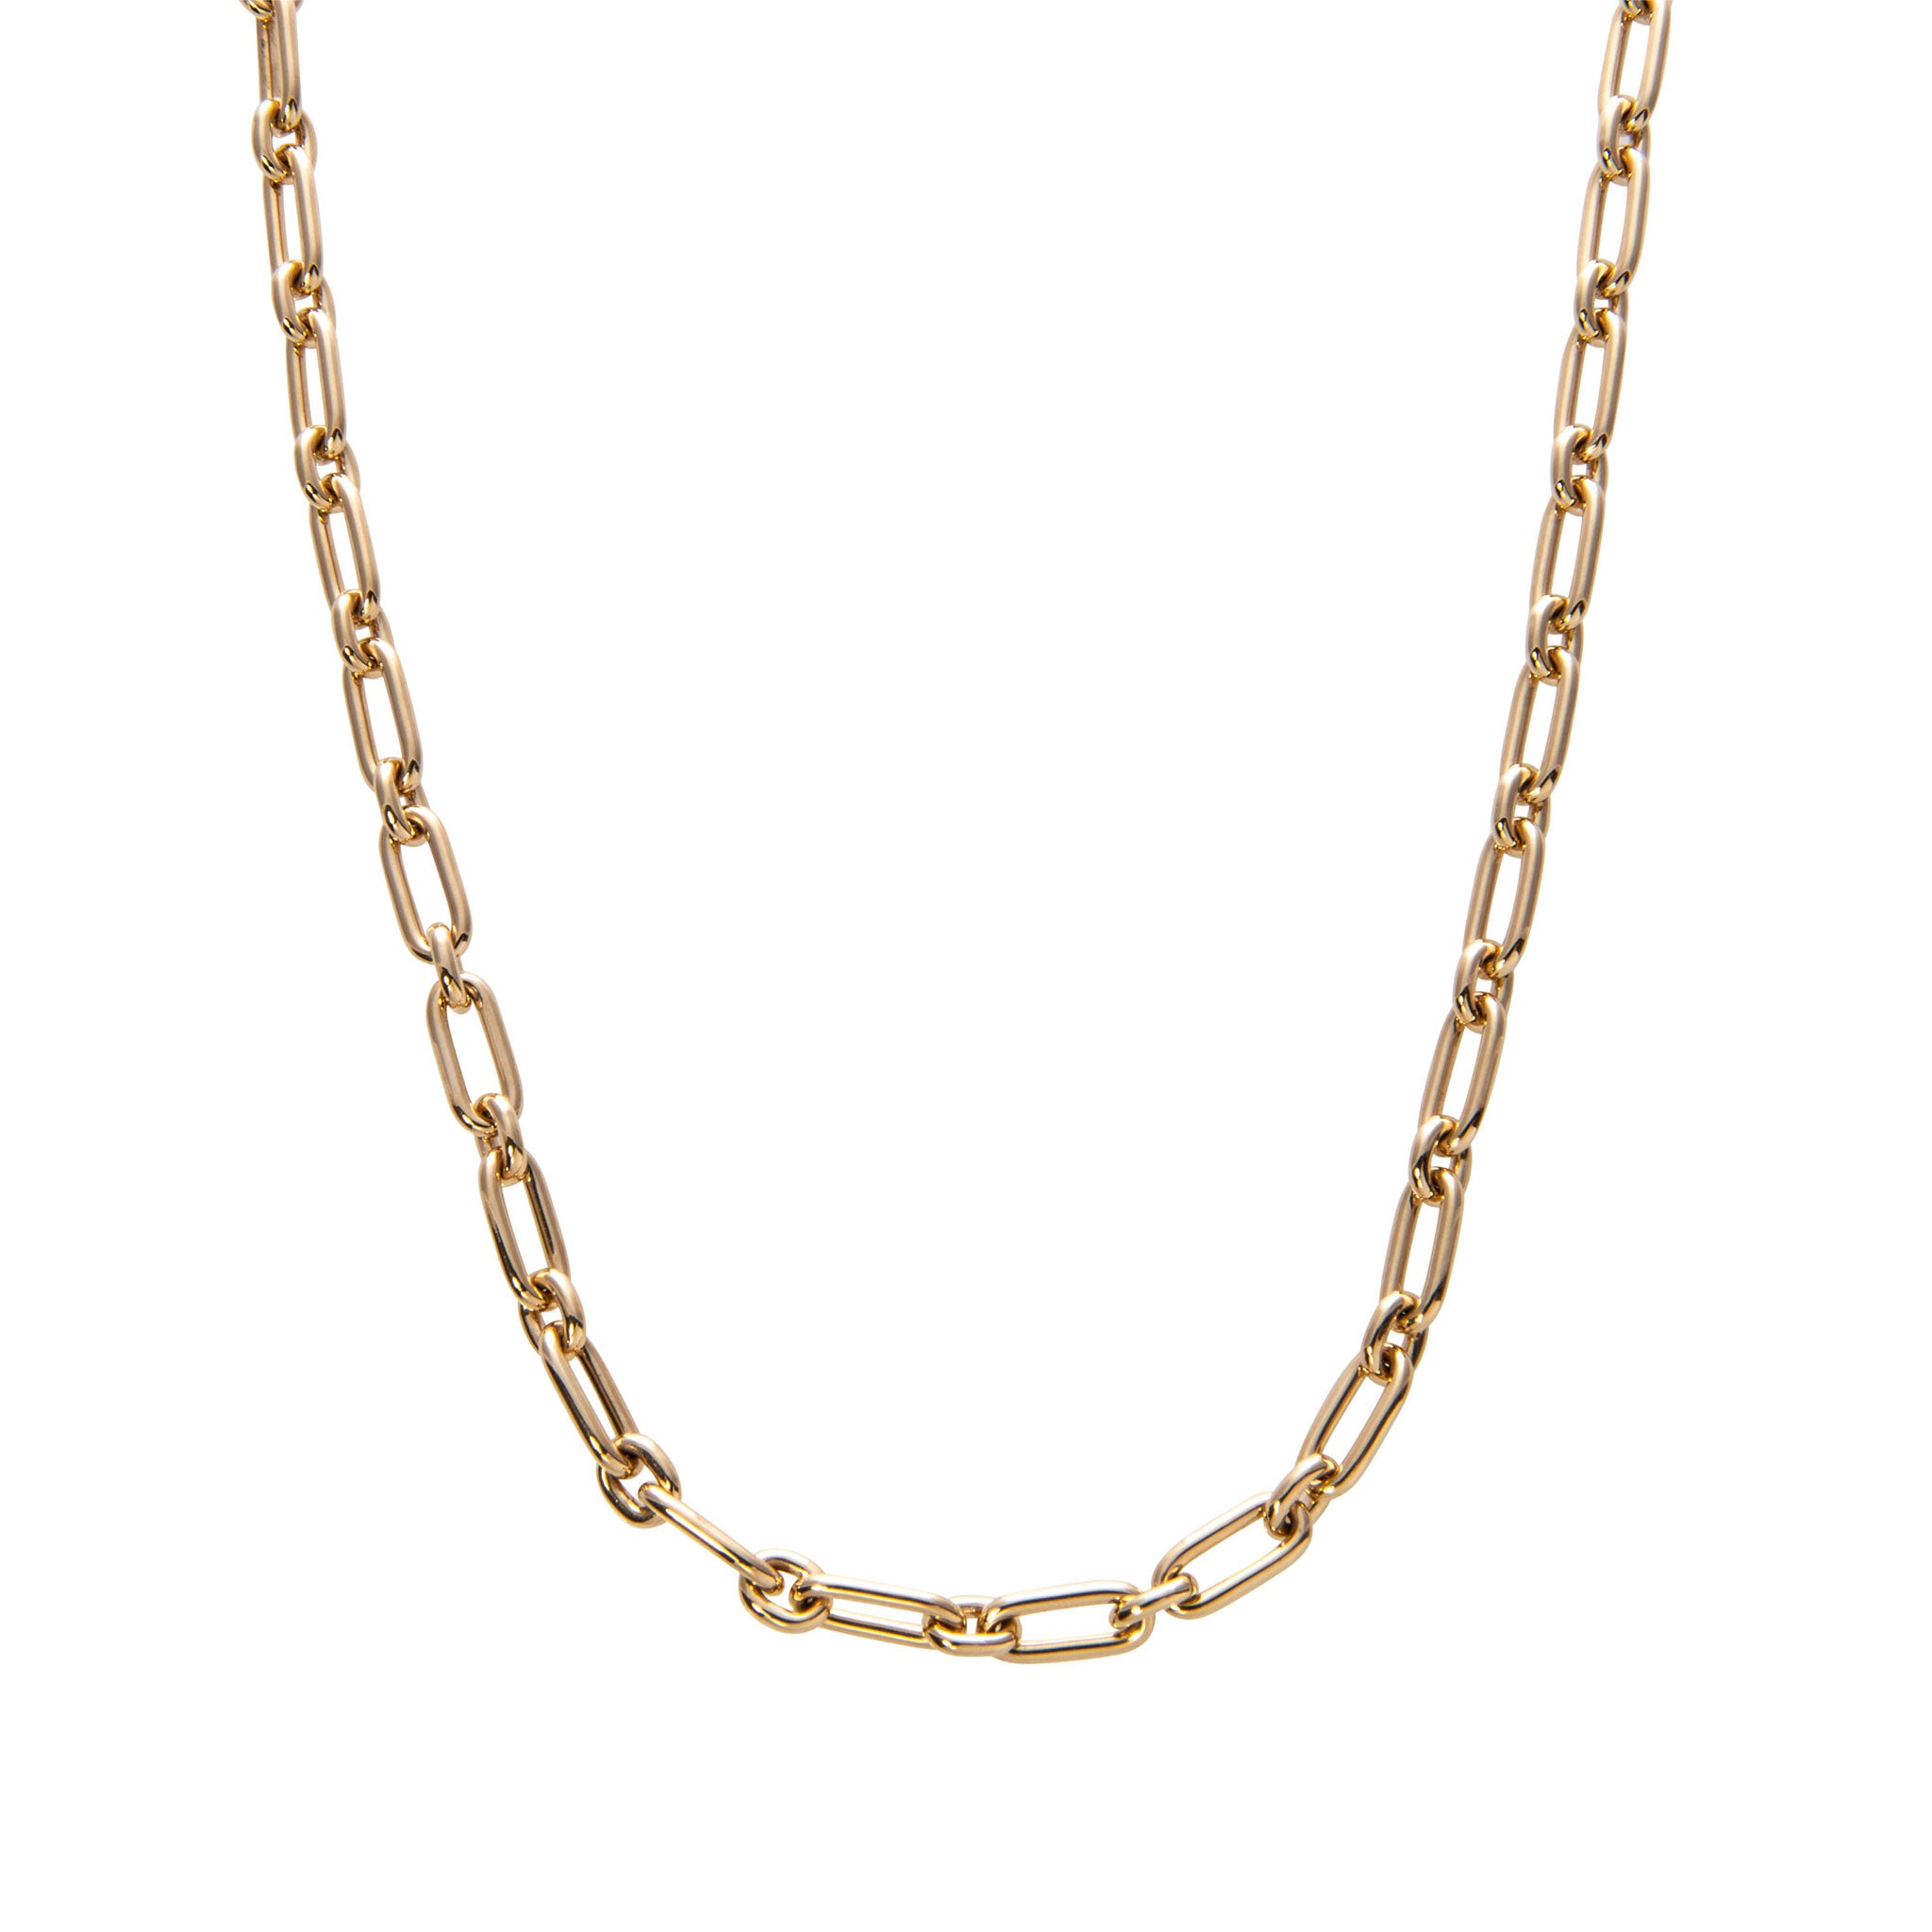 18K Yellow Gold Italian Oblong Oval Link Necklace 24 inches